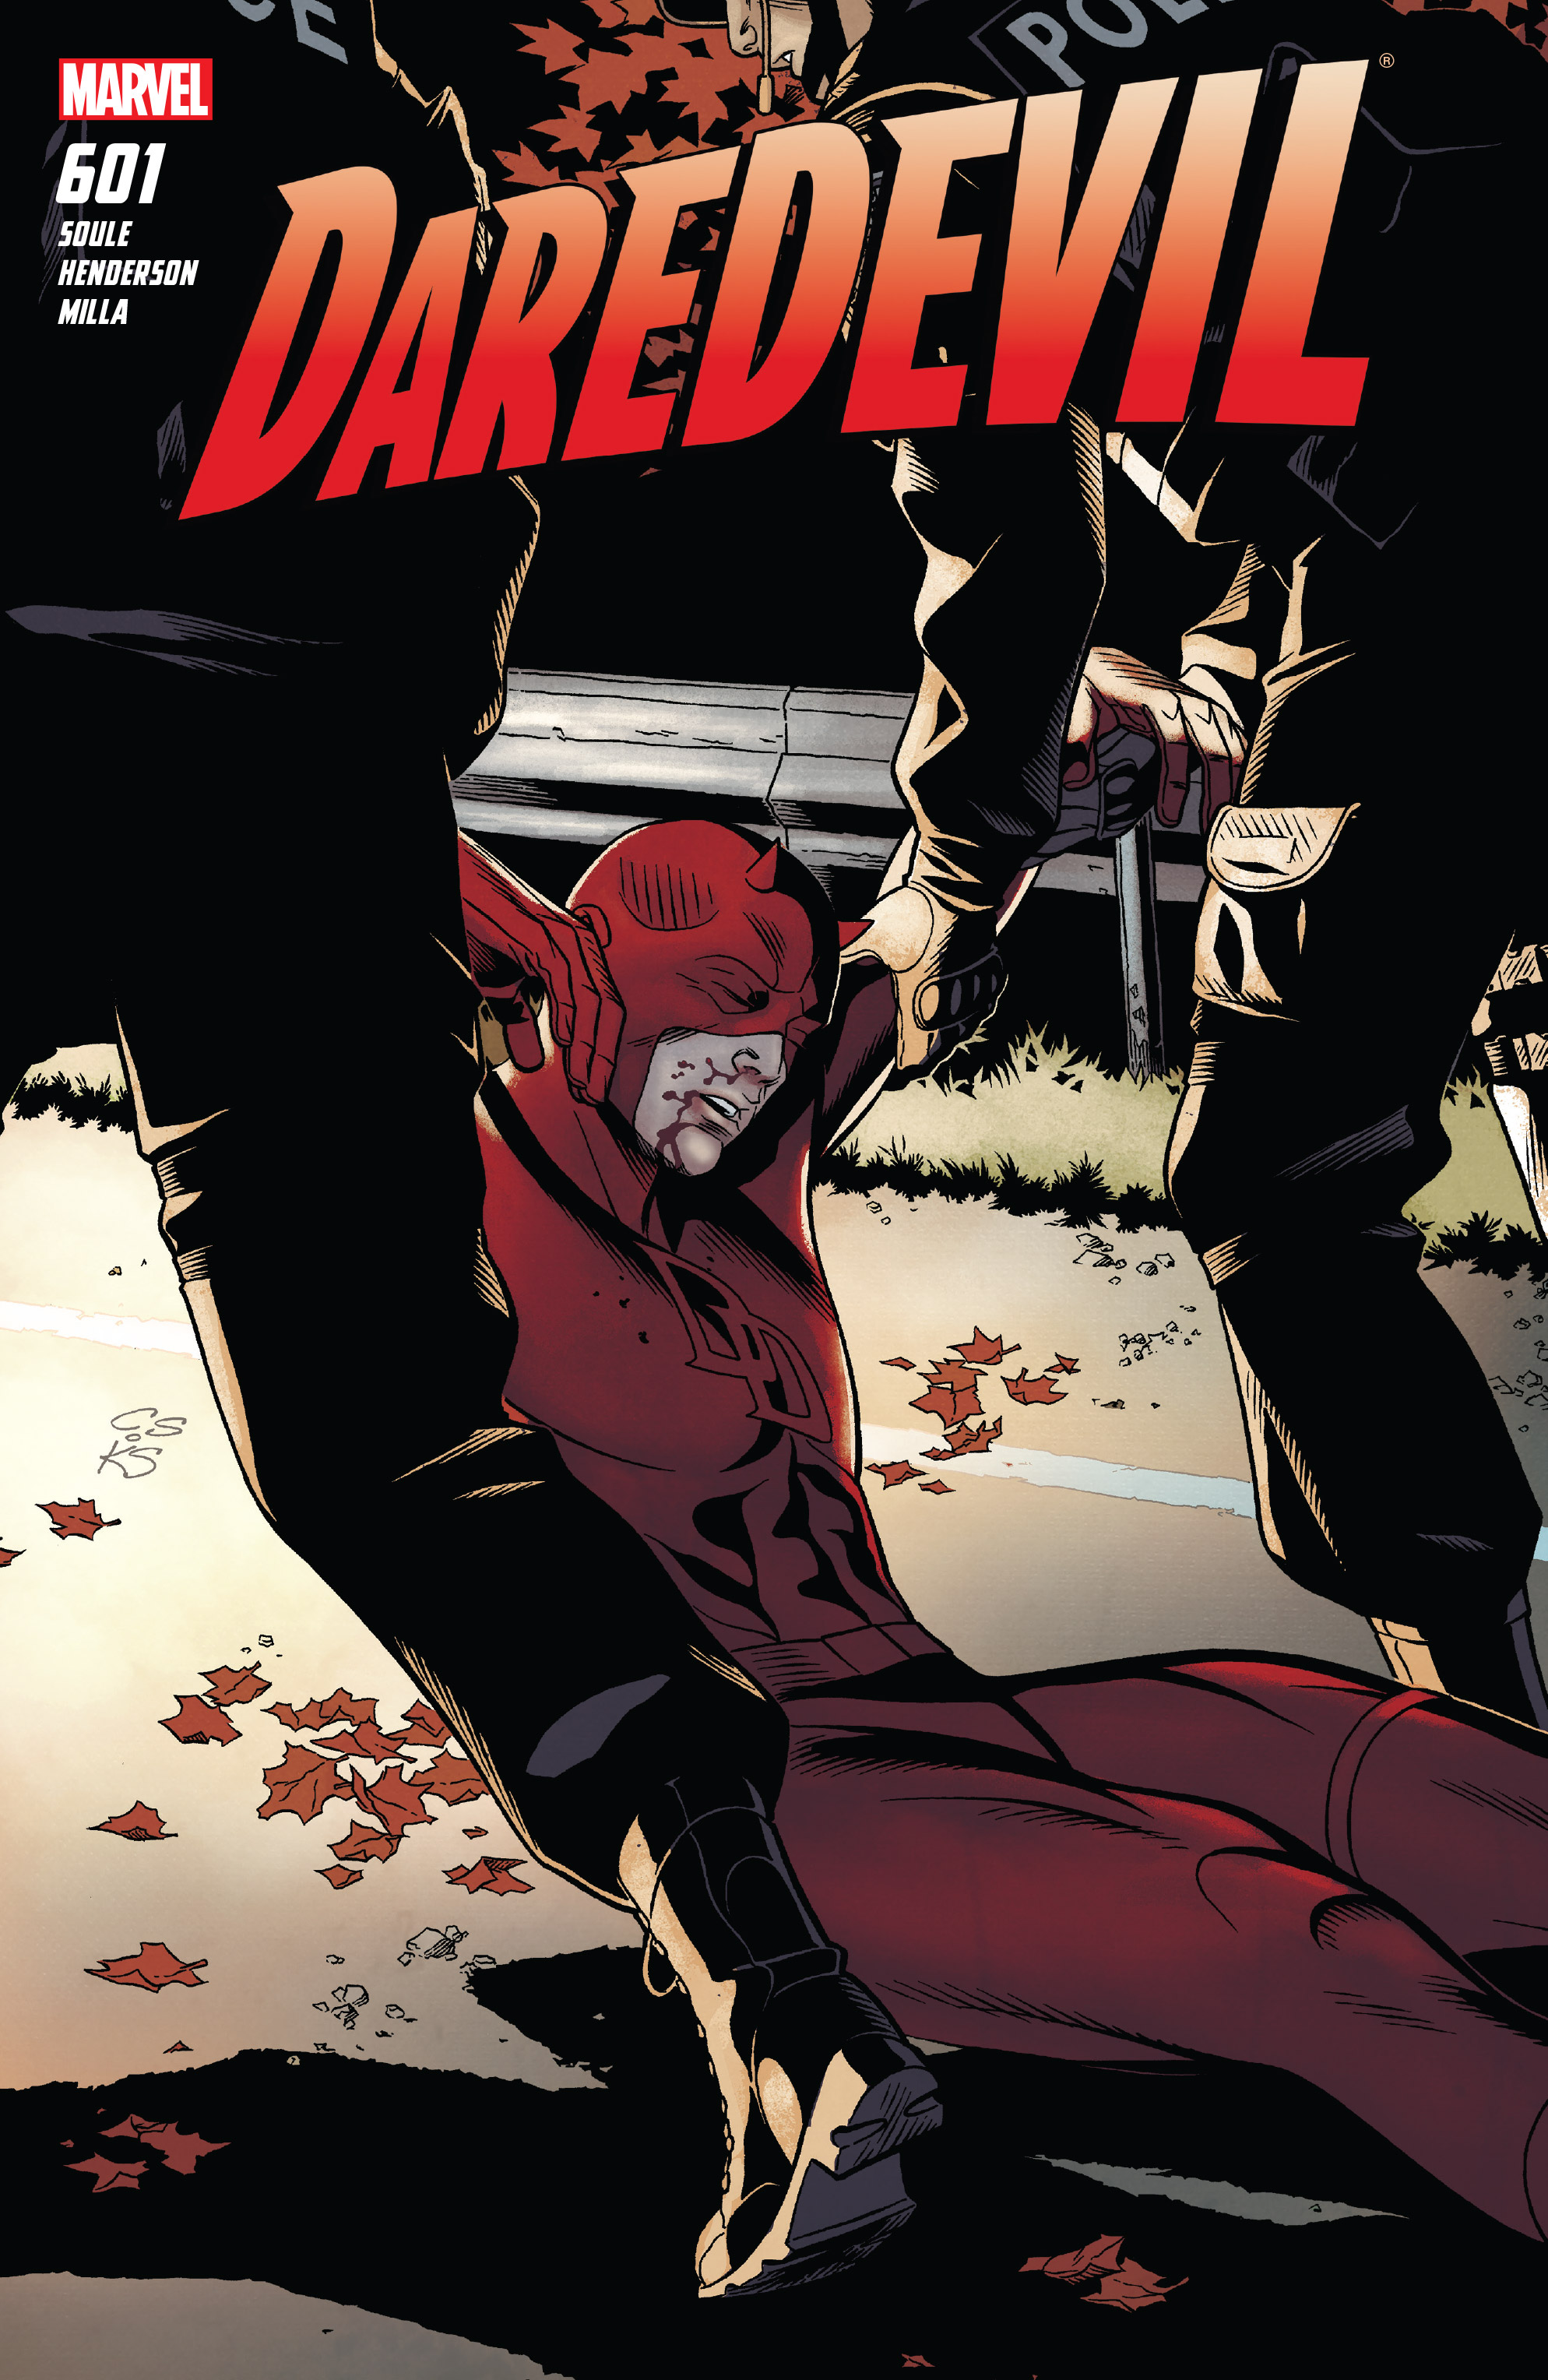 Daredevil (2016-): Chapter 601 - Page 1